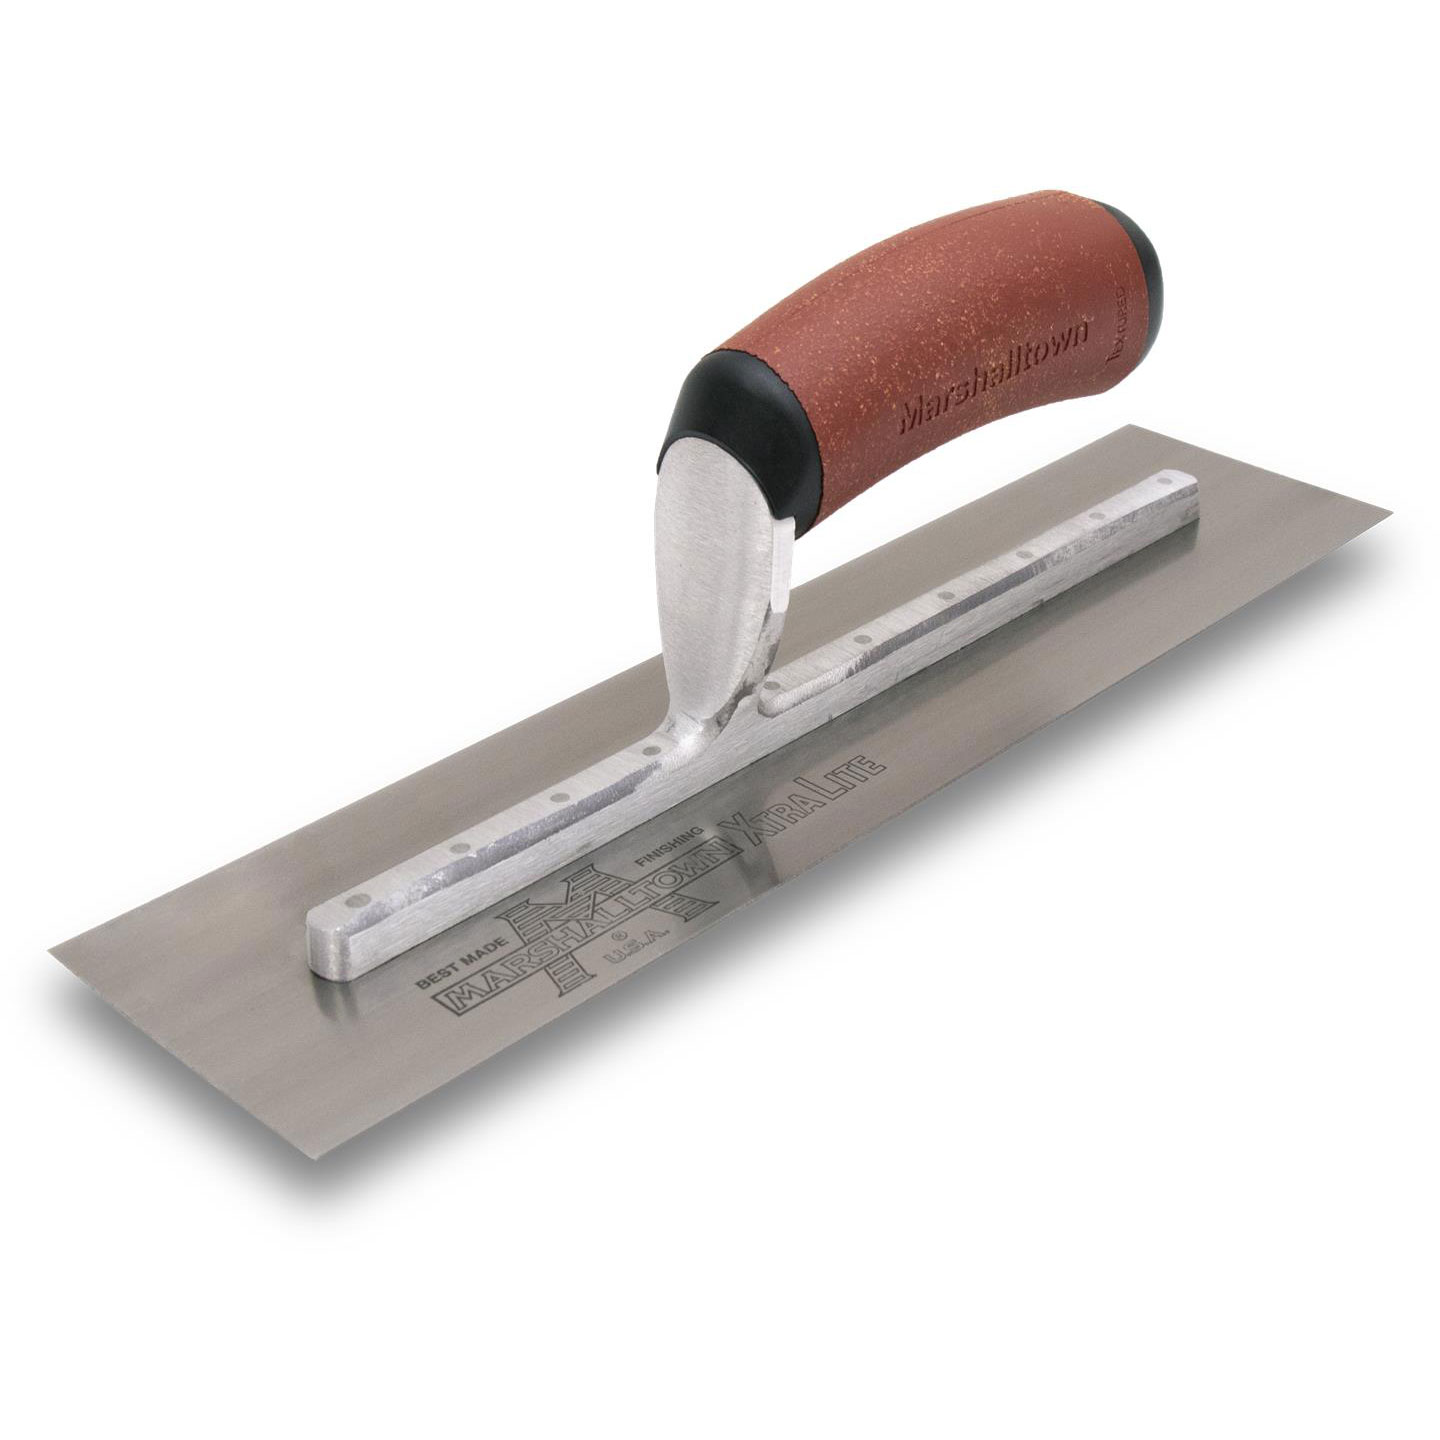 Marshalltown MXS145DC 14in x 5in Finishing Trowel with DuraCork Handle MXS145DC